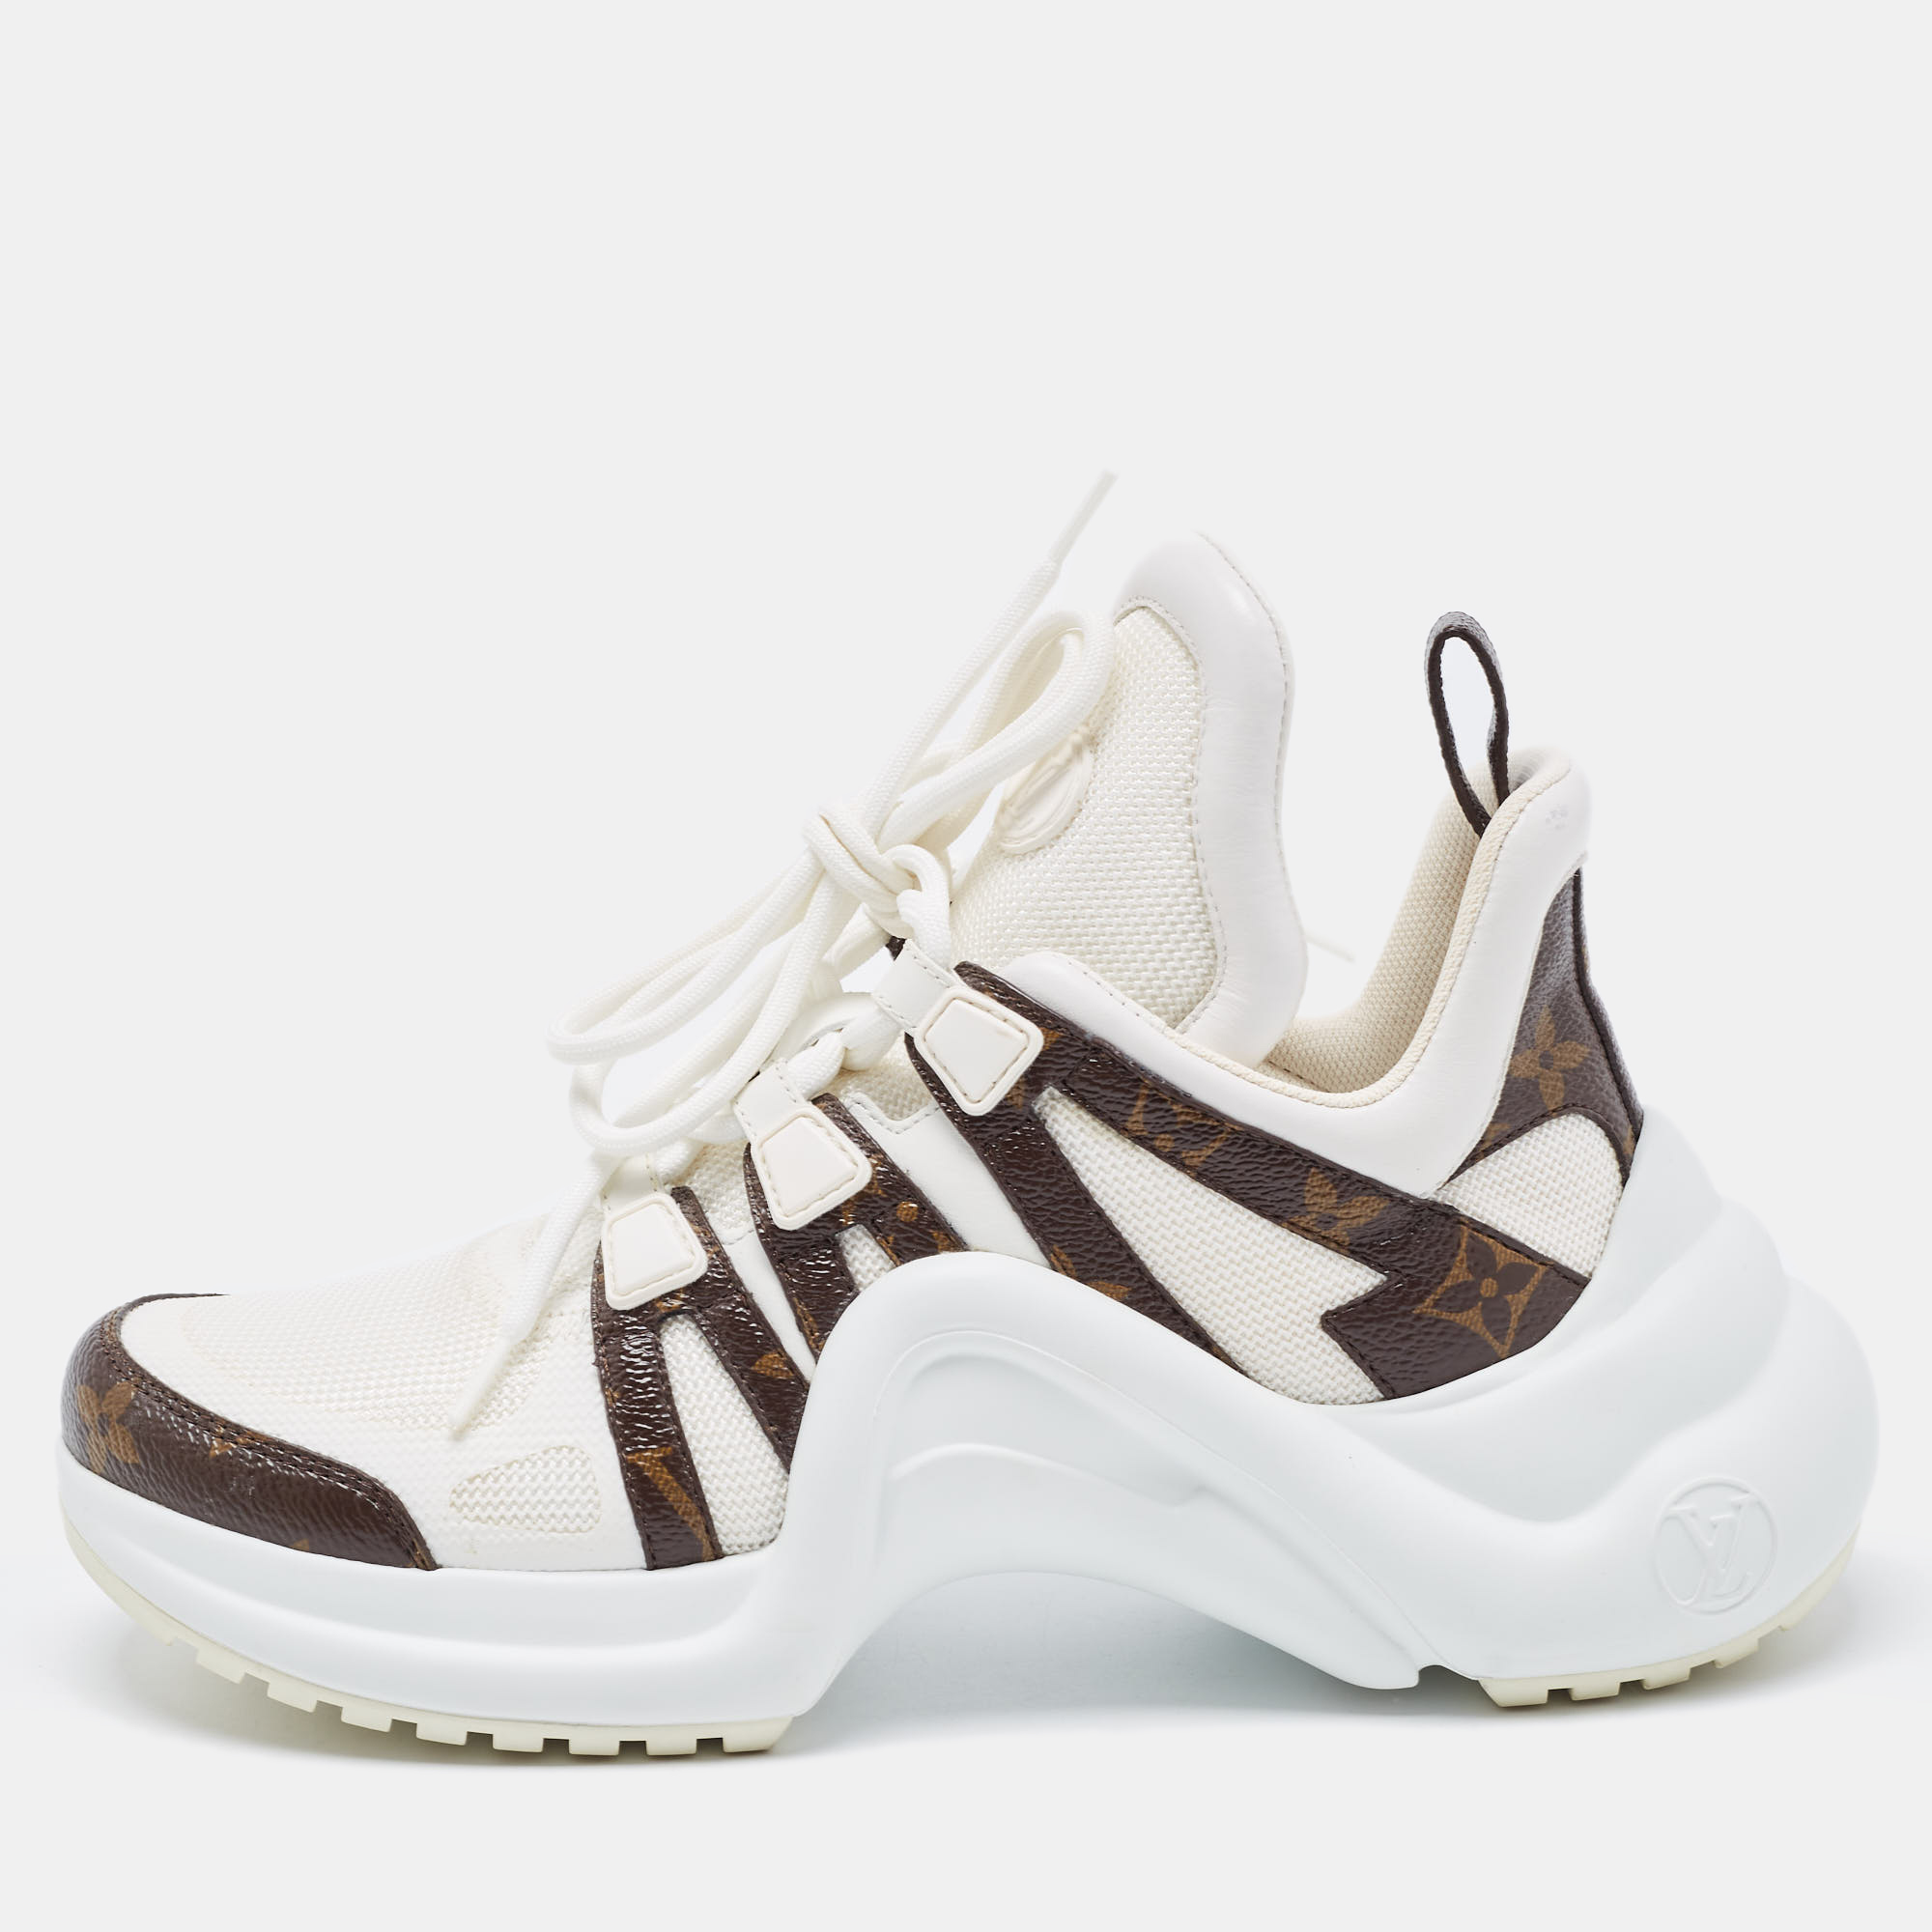 Louis Vuitton White Mesh and Monogram Canvas Archlight Sneakers